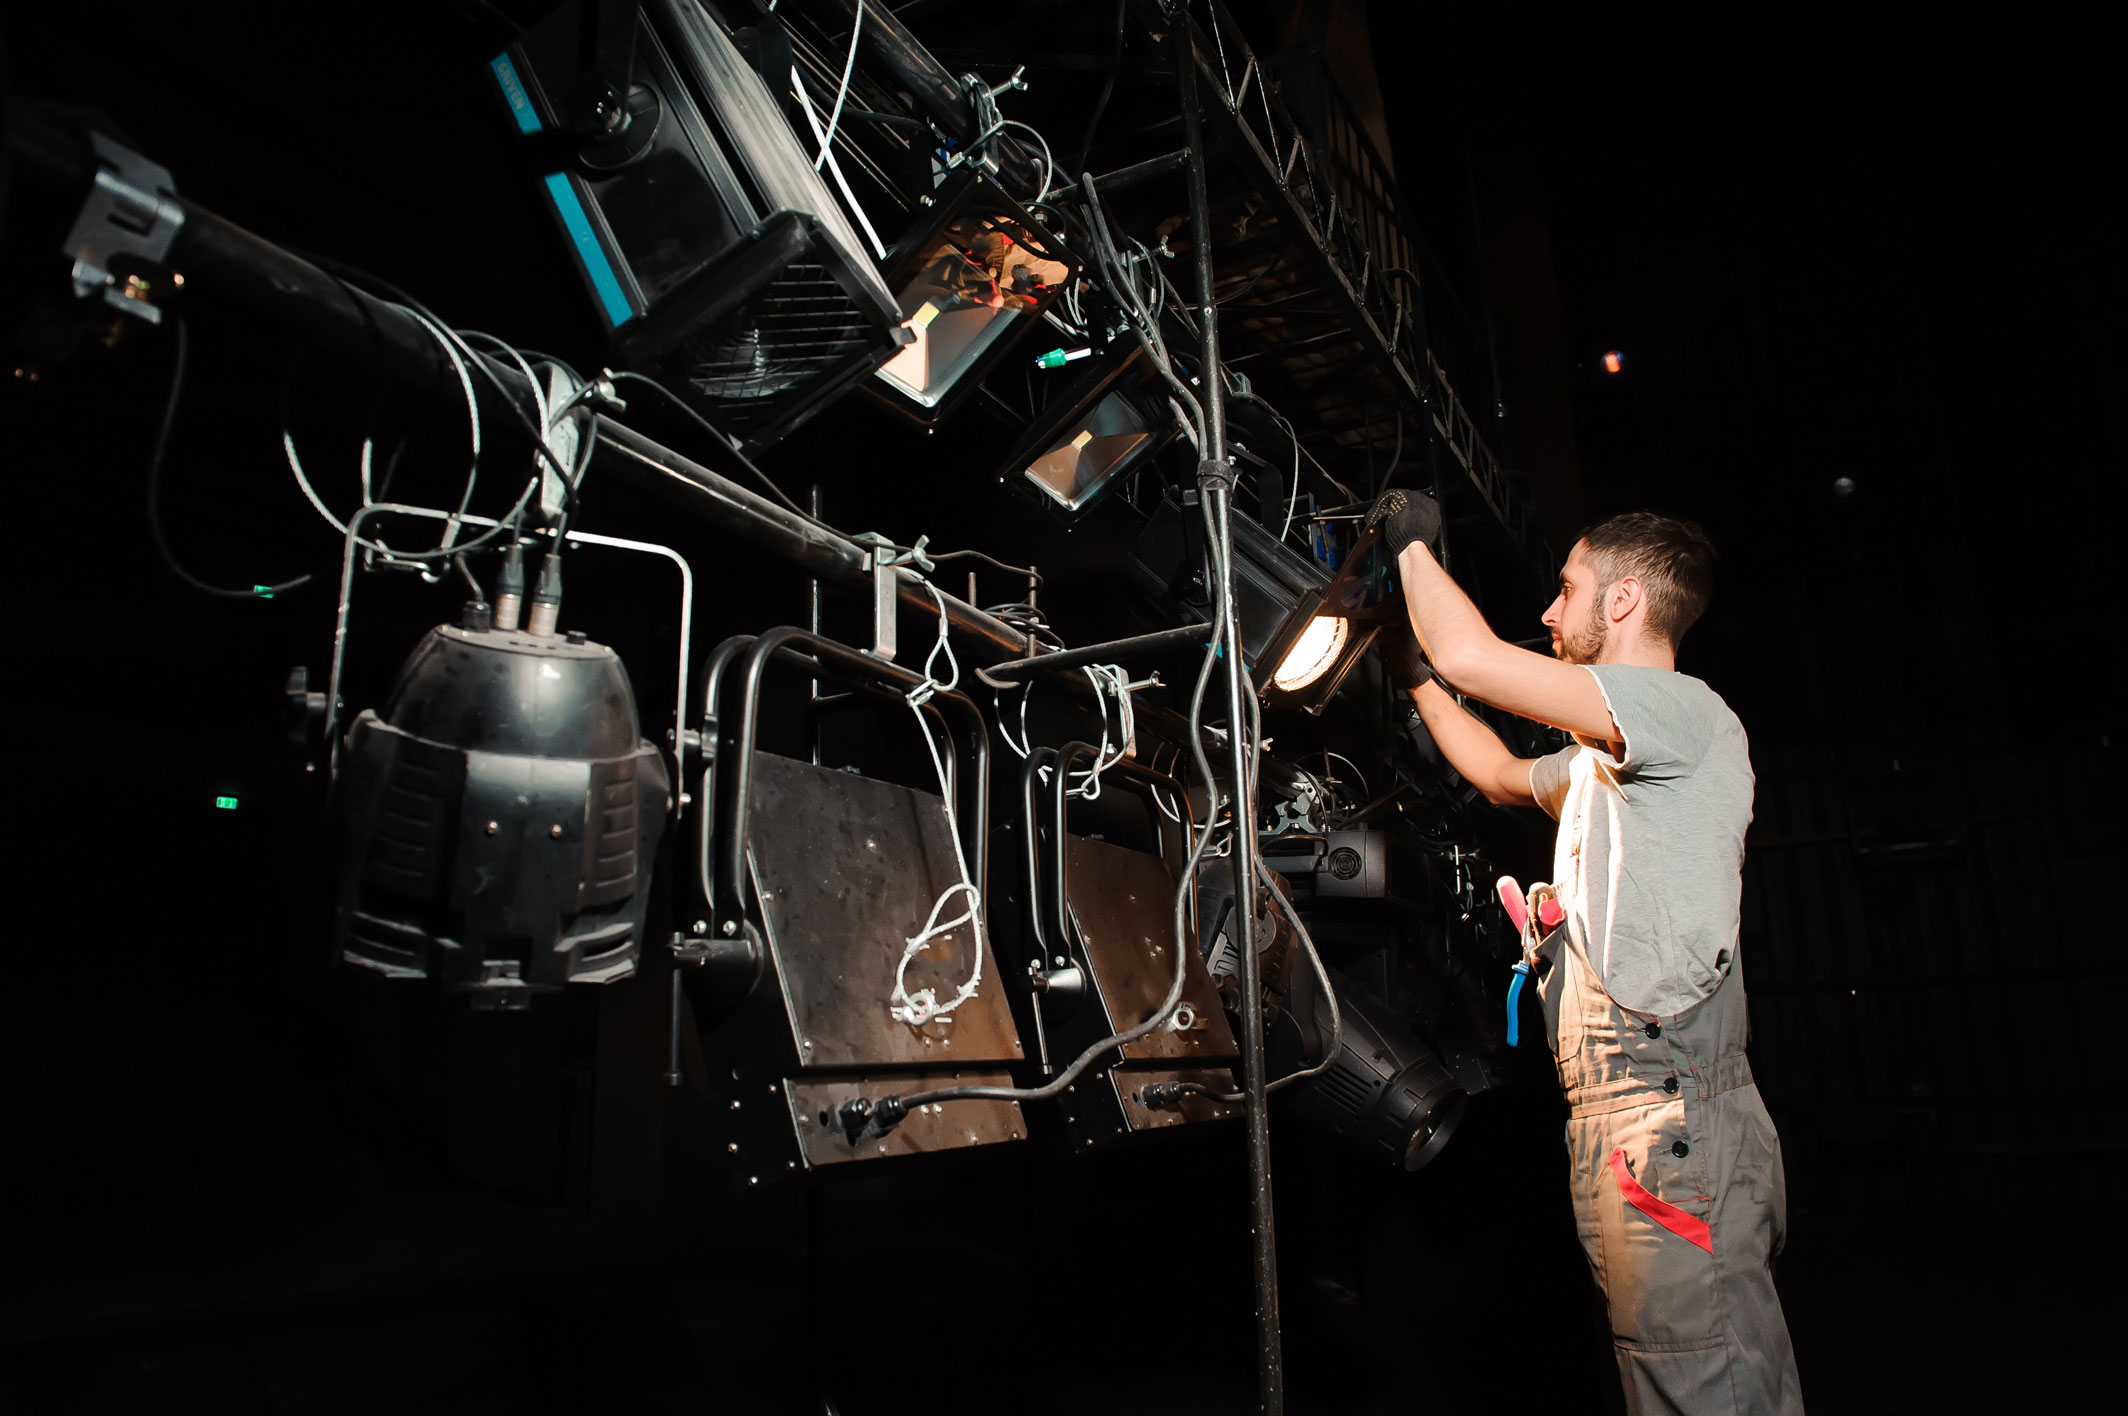 A man configures a stage lighting rig.